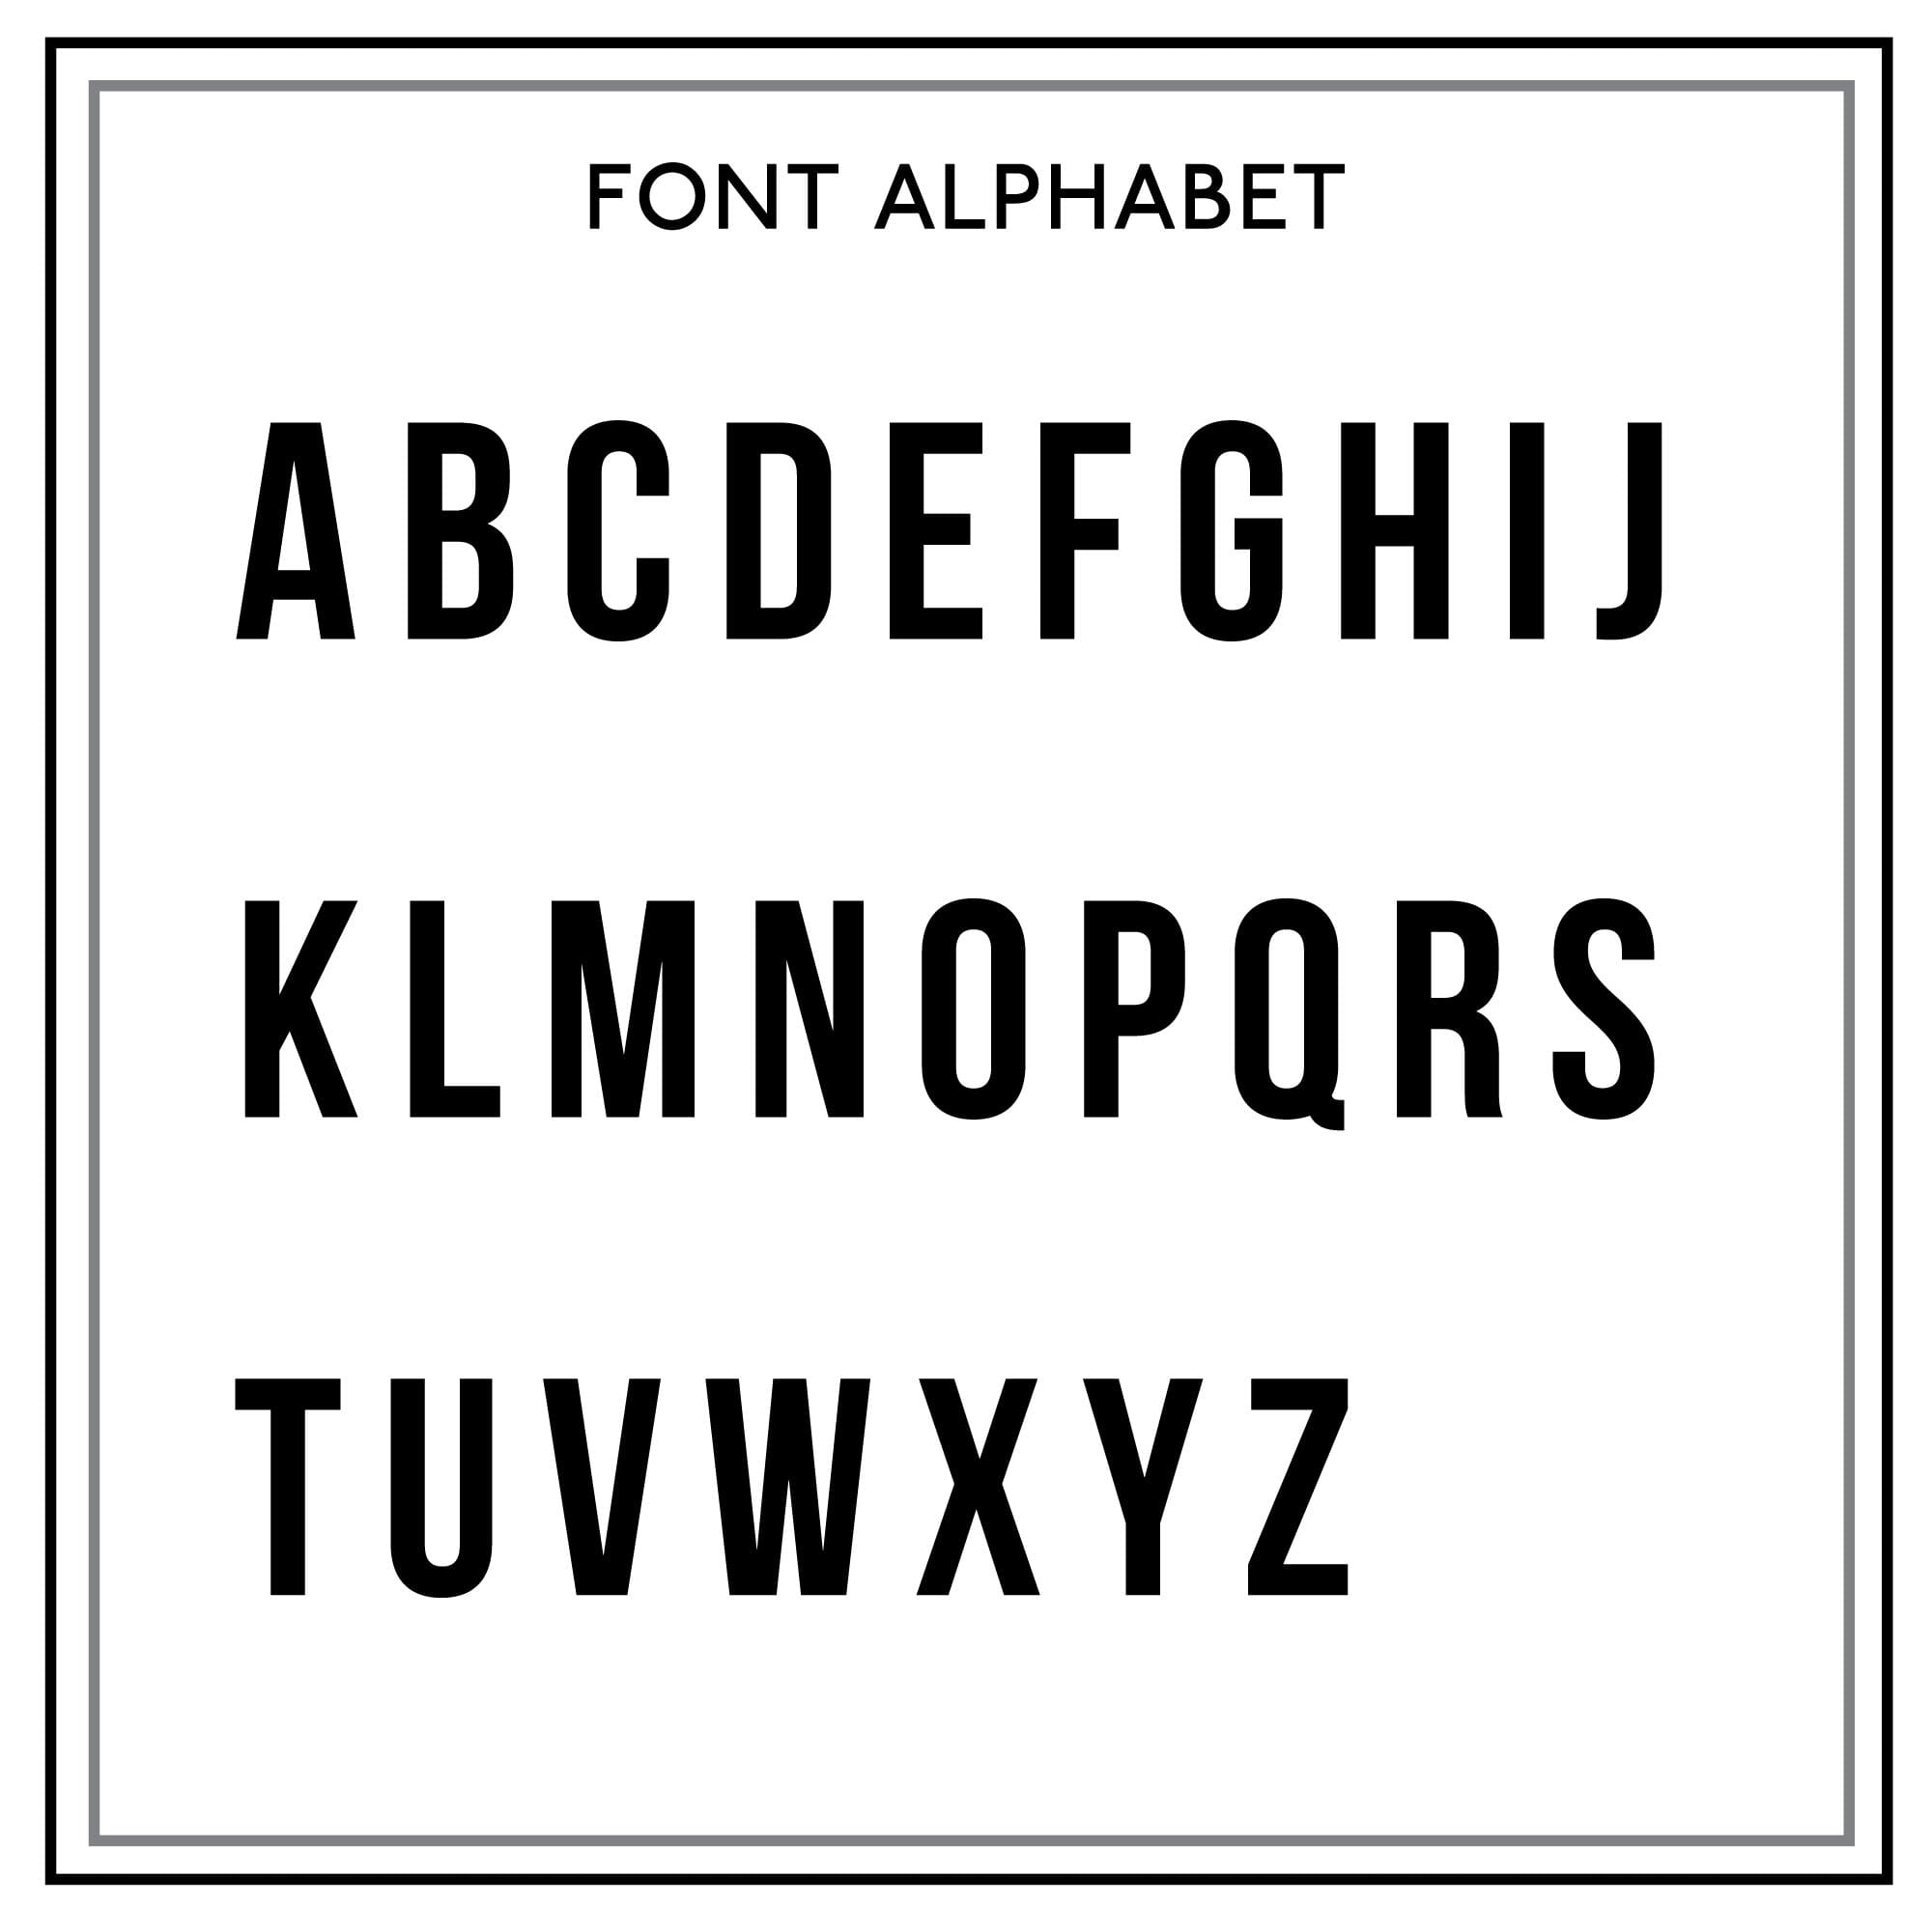 Image showing the block font used for the engraving